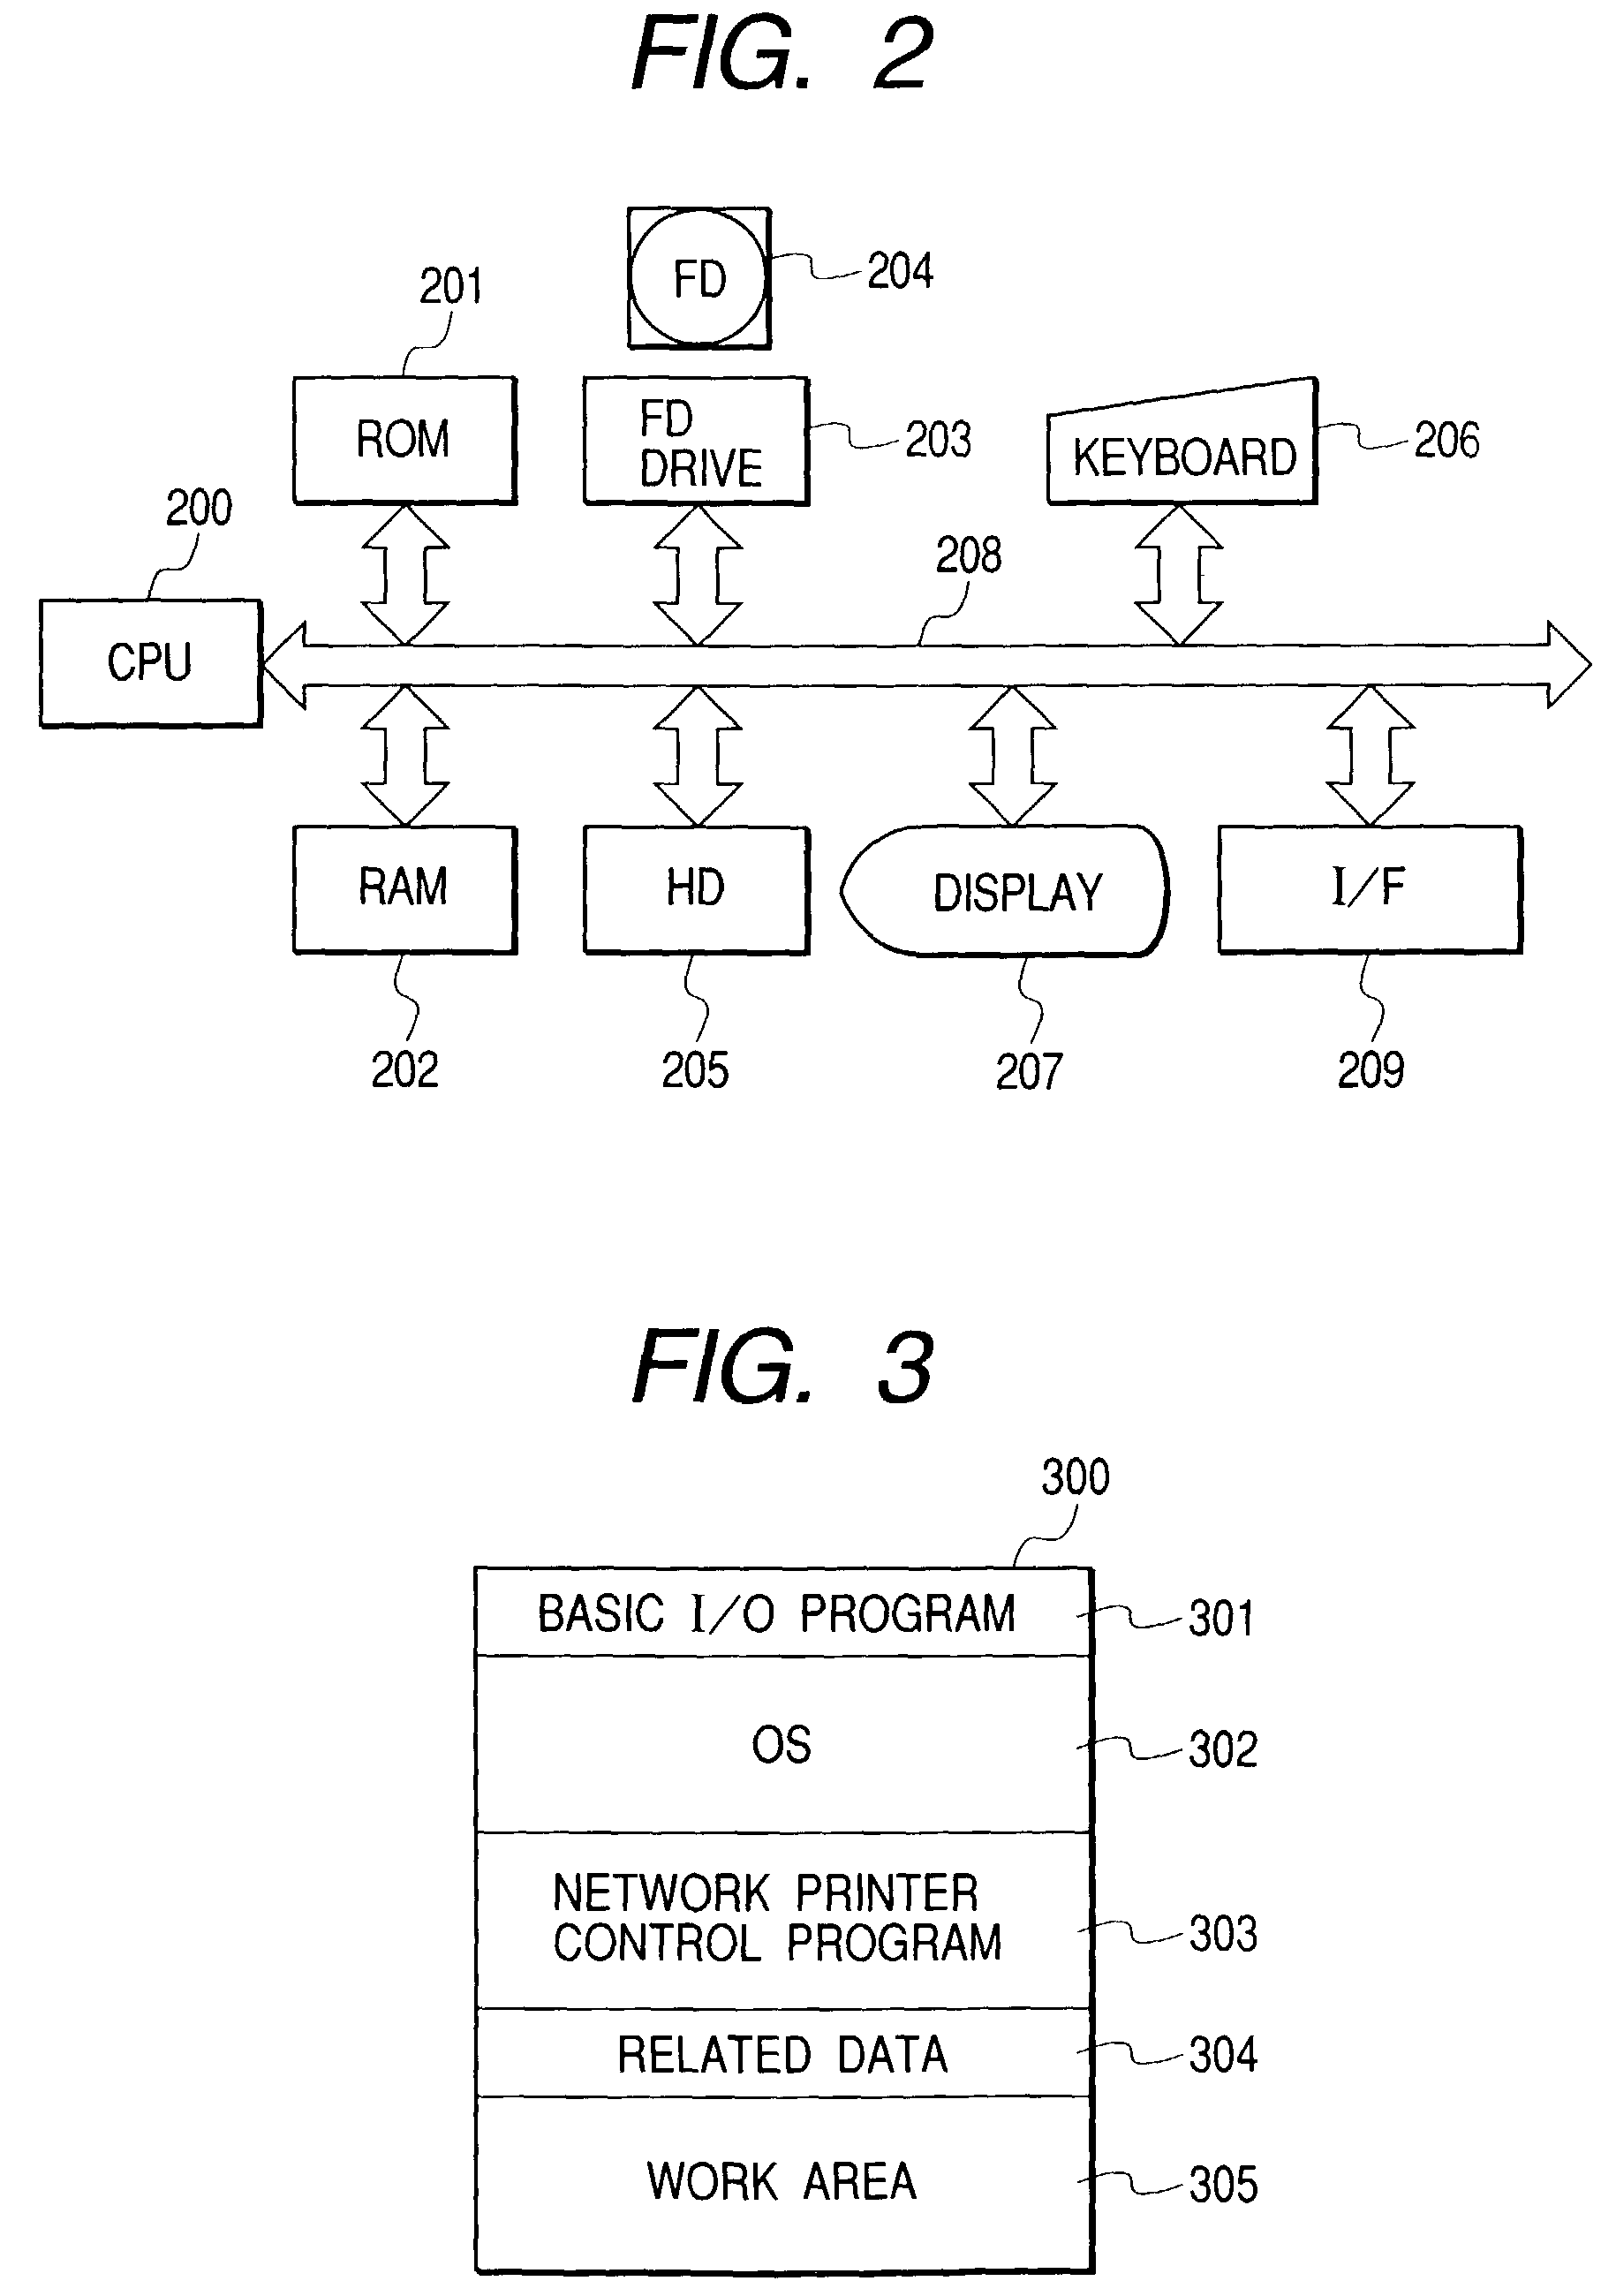 Print control with interfaces provided in correspondence with printing methods